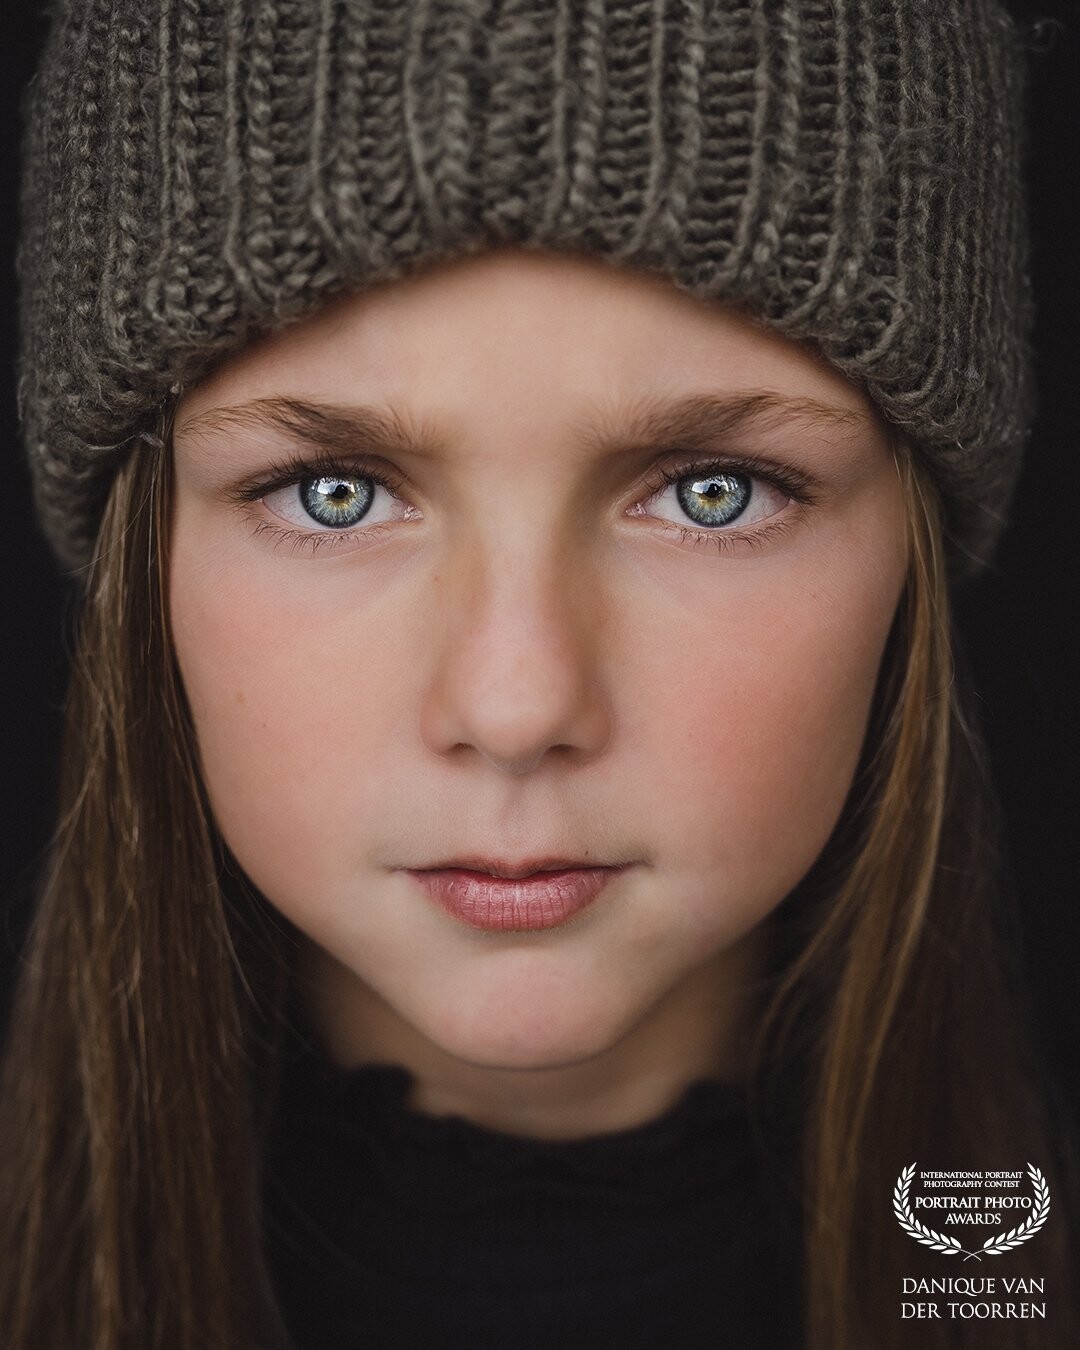 My own model Ravenna, my beautiful 9 year old daughter.<br />
Her face and her eyes show how beautiful she is<br />
<br />
Model: Ravenna<br />
Photo & Lightroom edit: @daniquevdtphotography